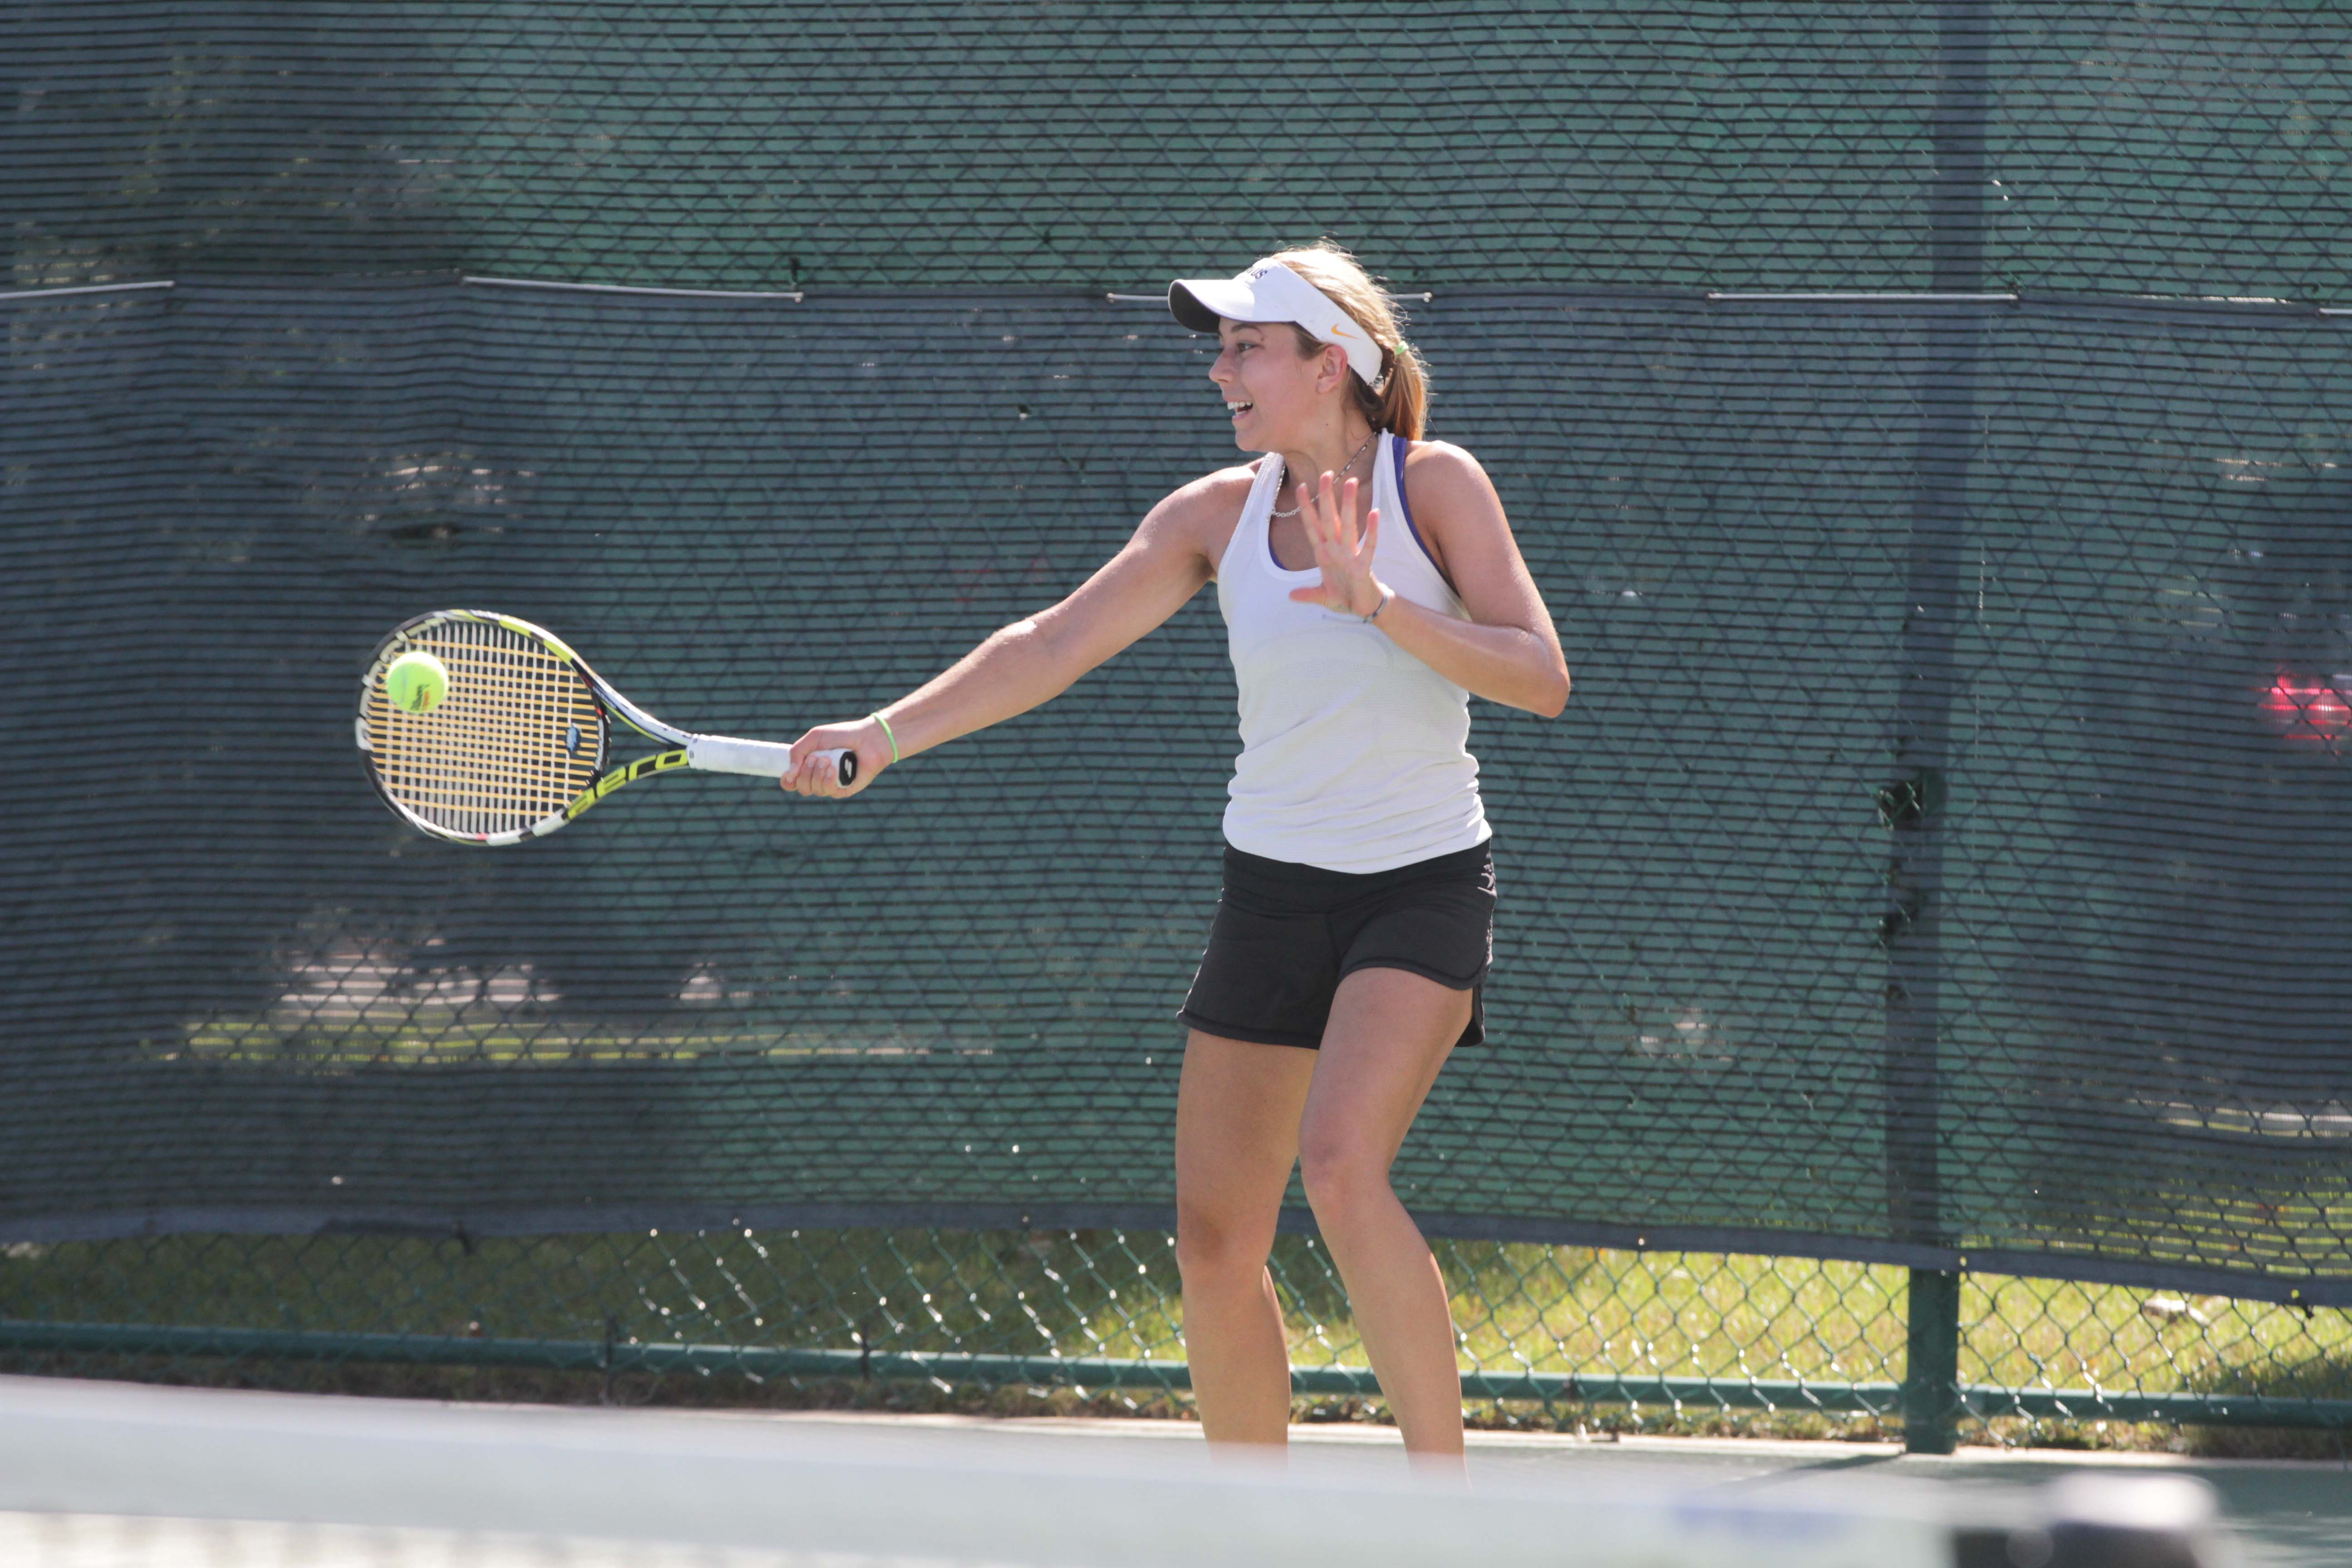 Sophomore Ginger Valenine returns the ball during a singles match. The Gusties currently hold a record of 9-6 in all competitions this spring.